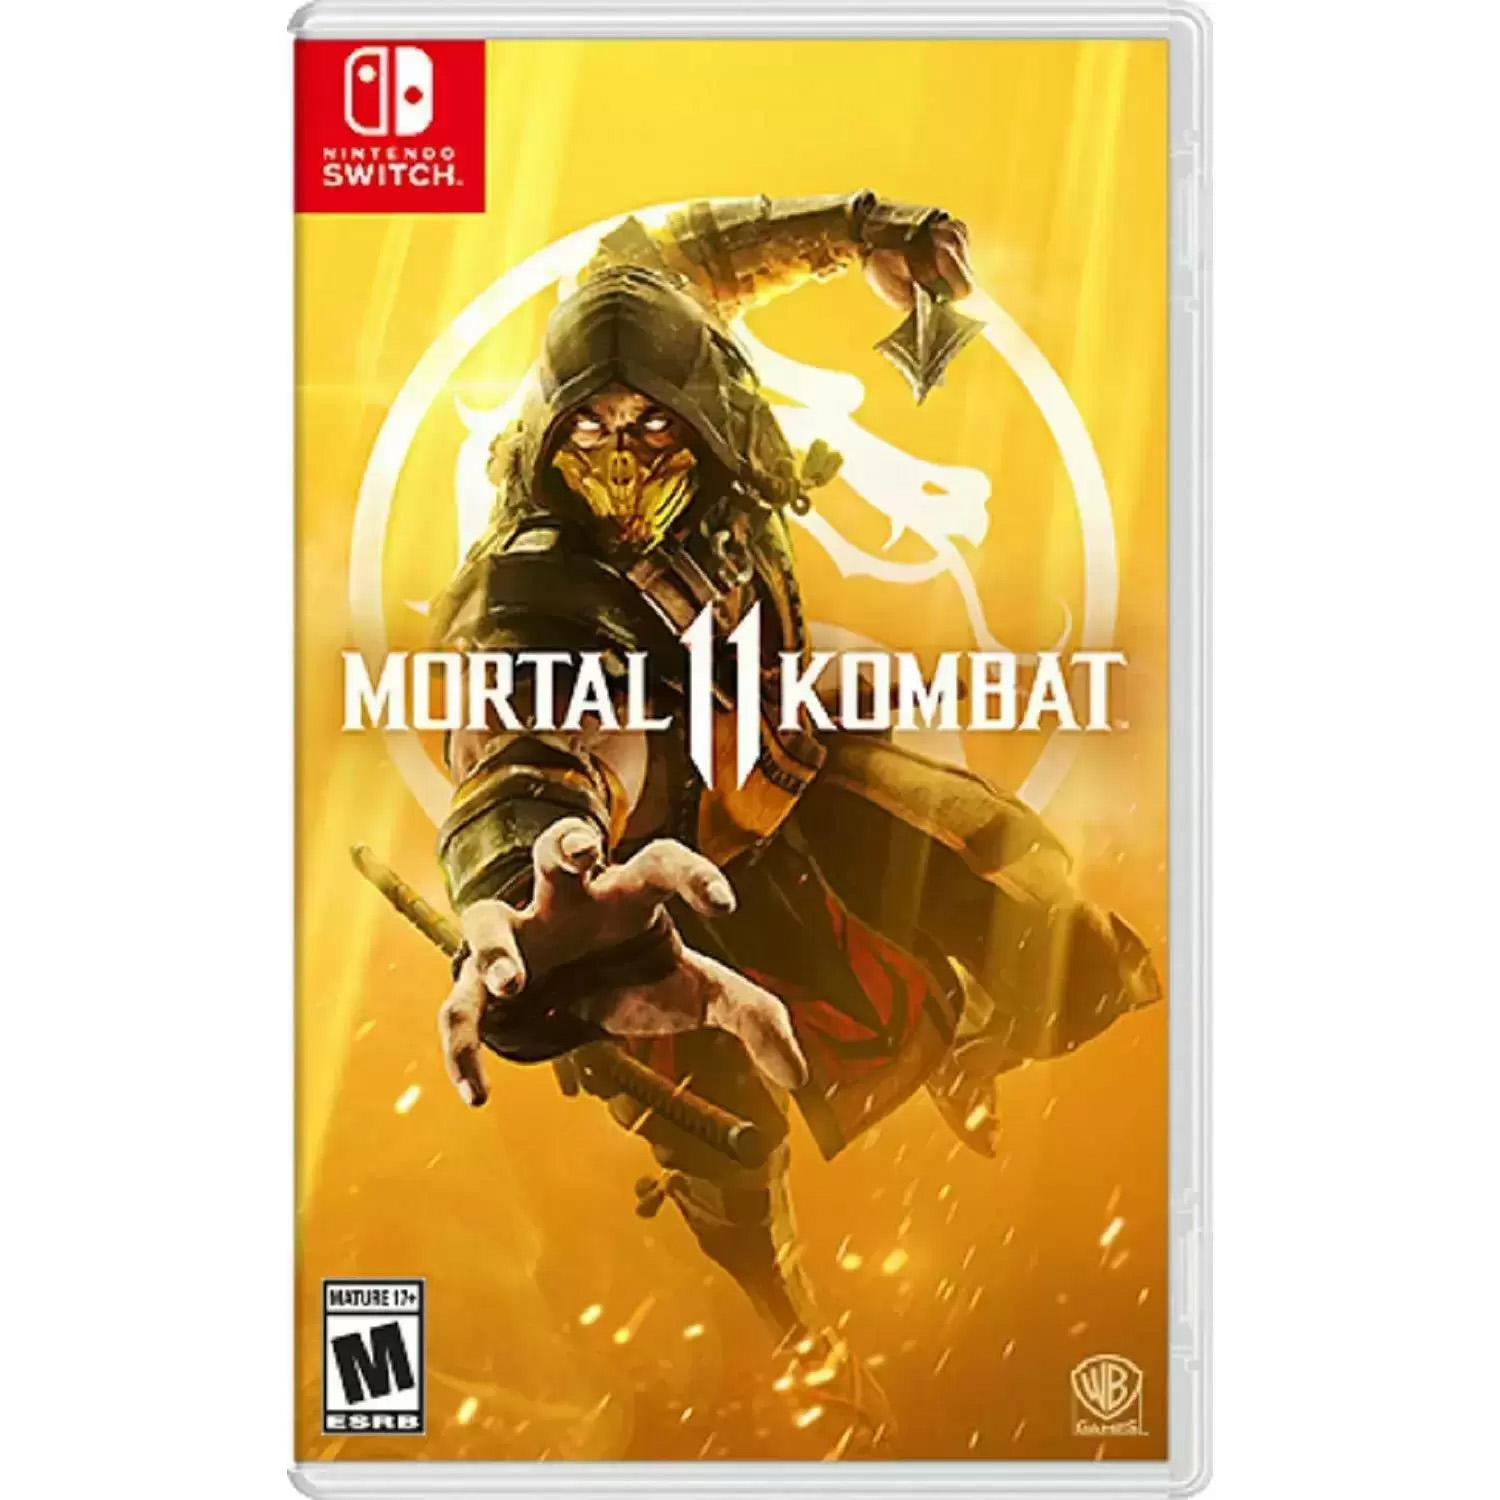 Mortal Kombat 11 PS4 or Xbox One or Switch for $12.99